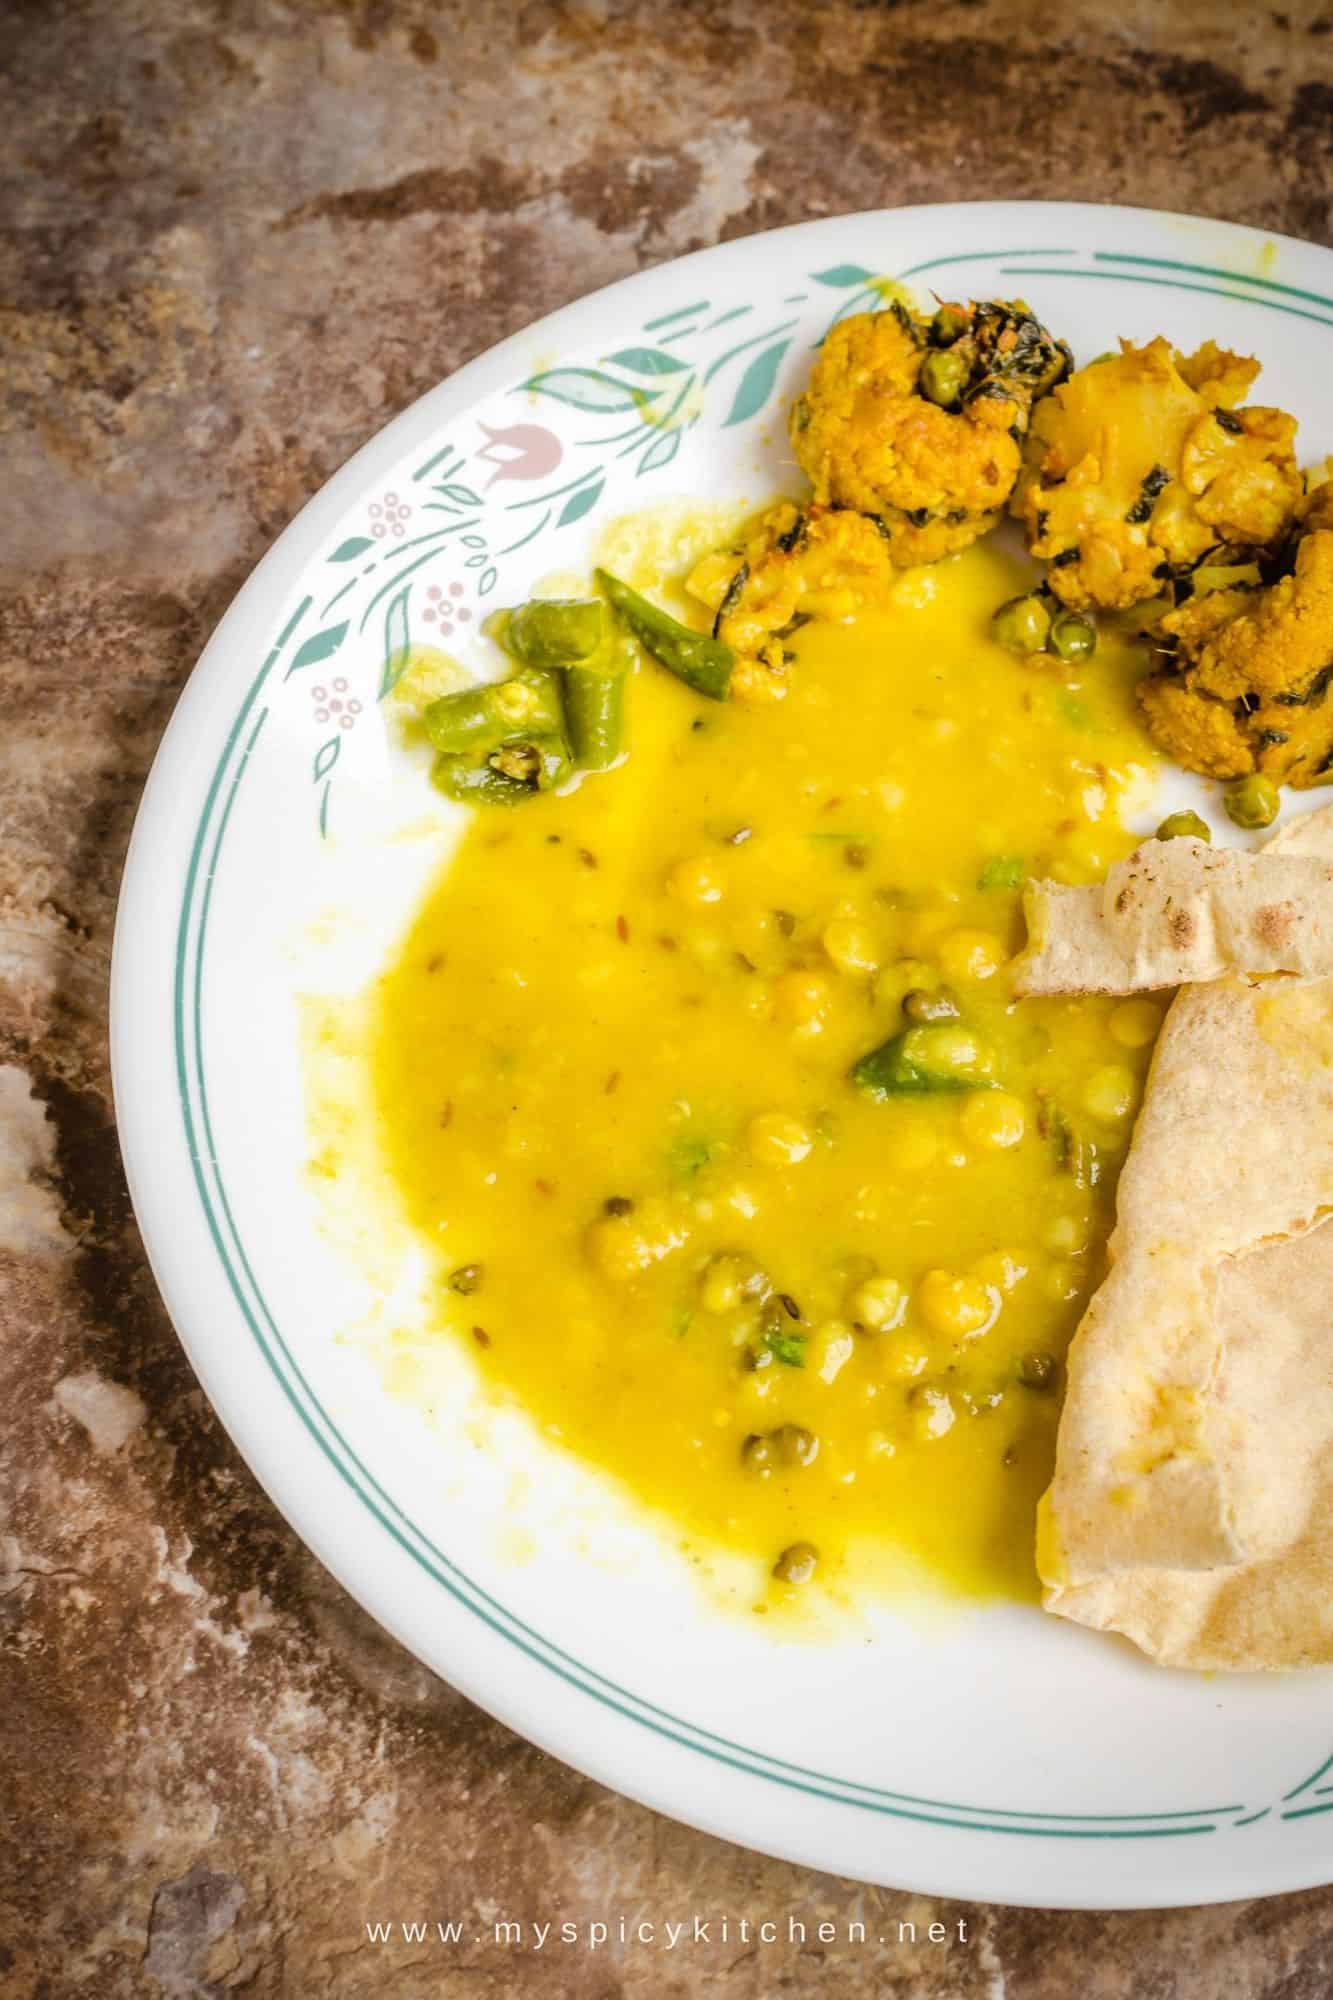 Plate of dal with roti and cauliflower